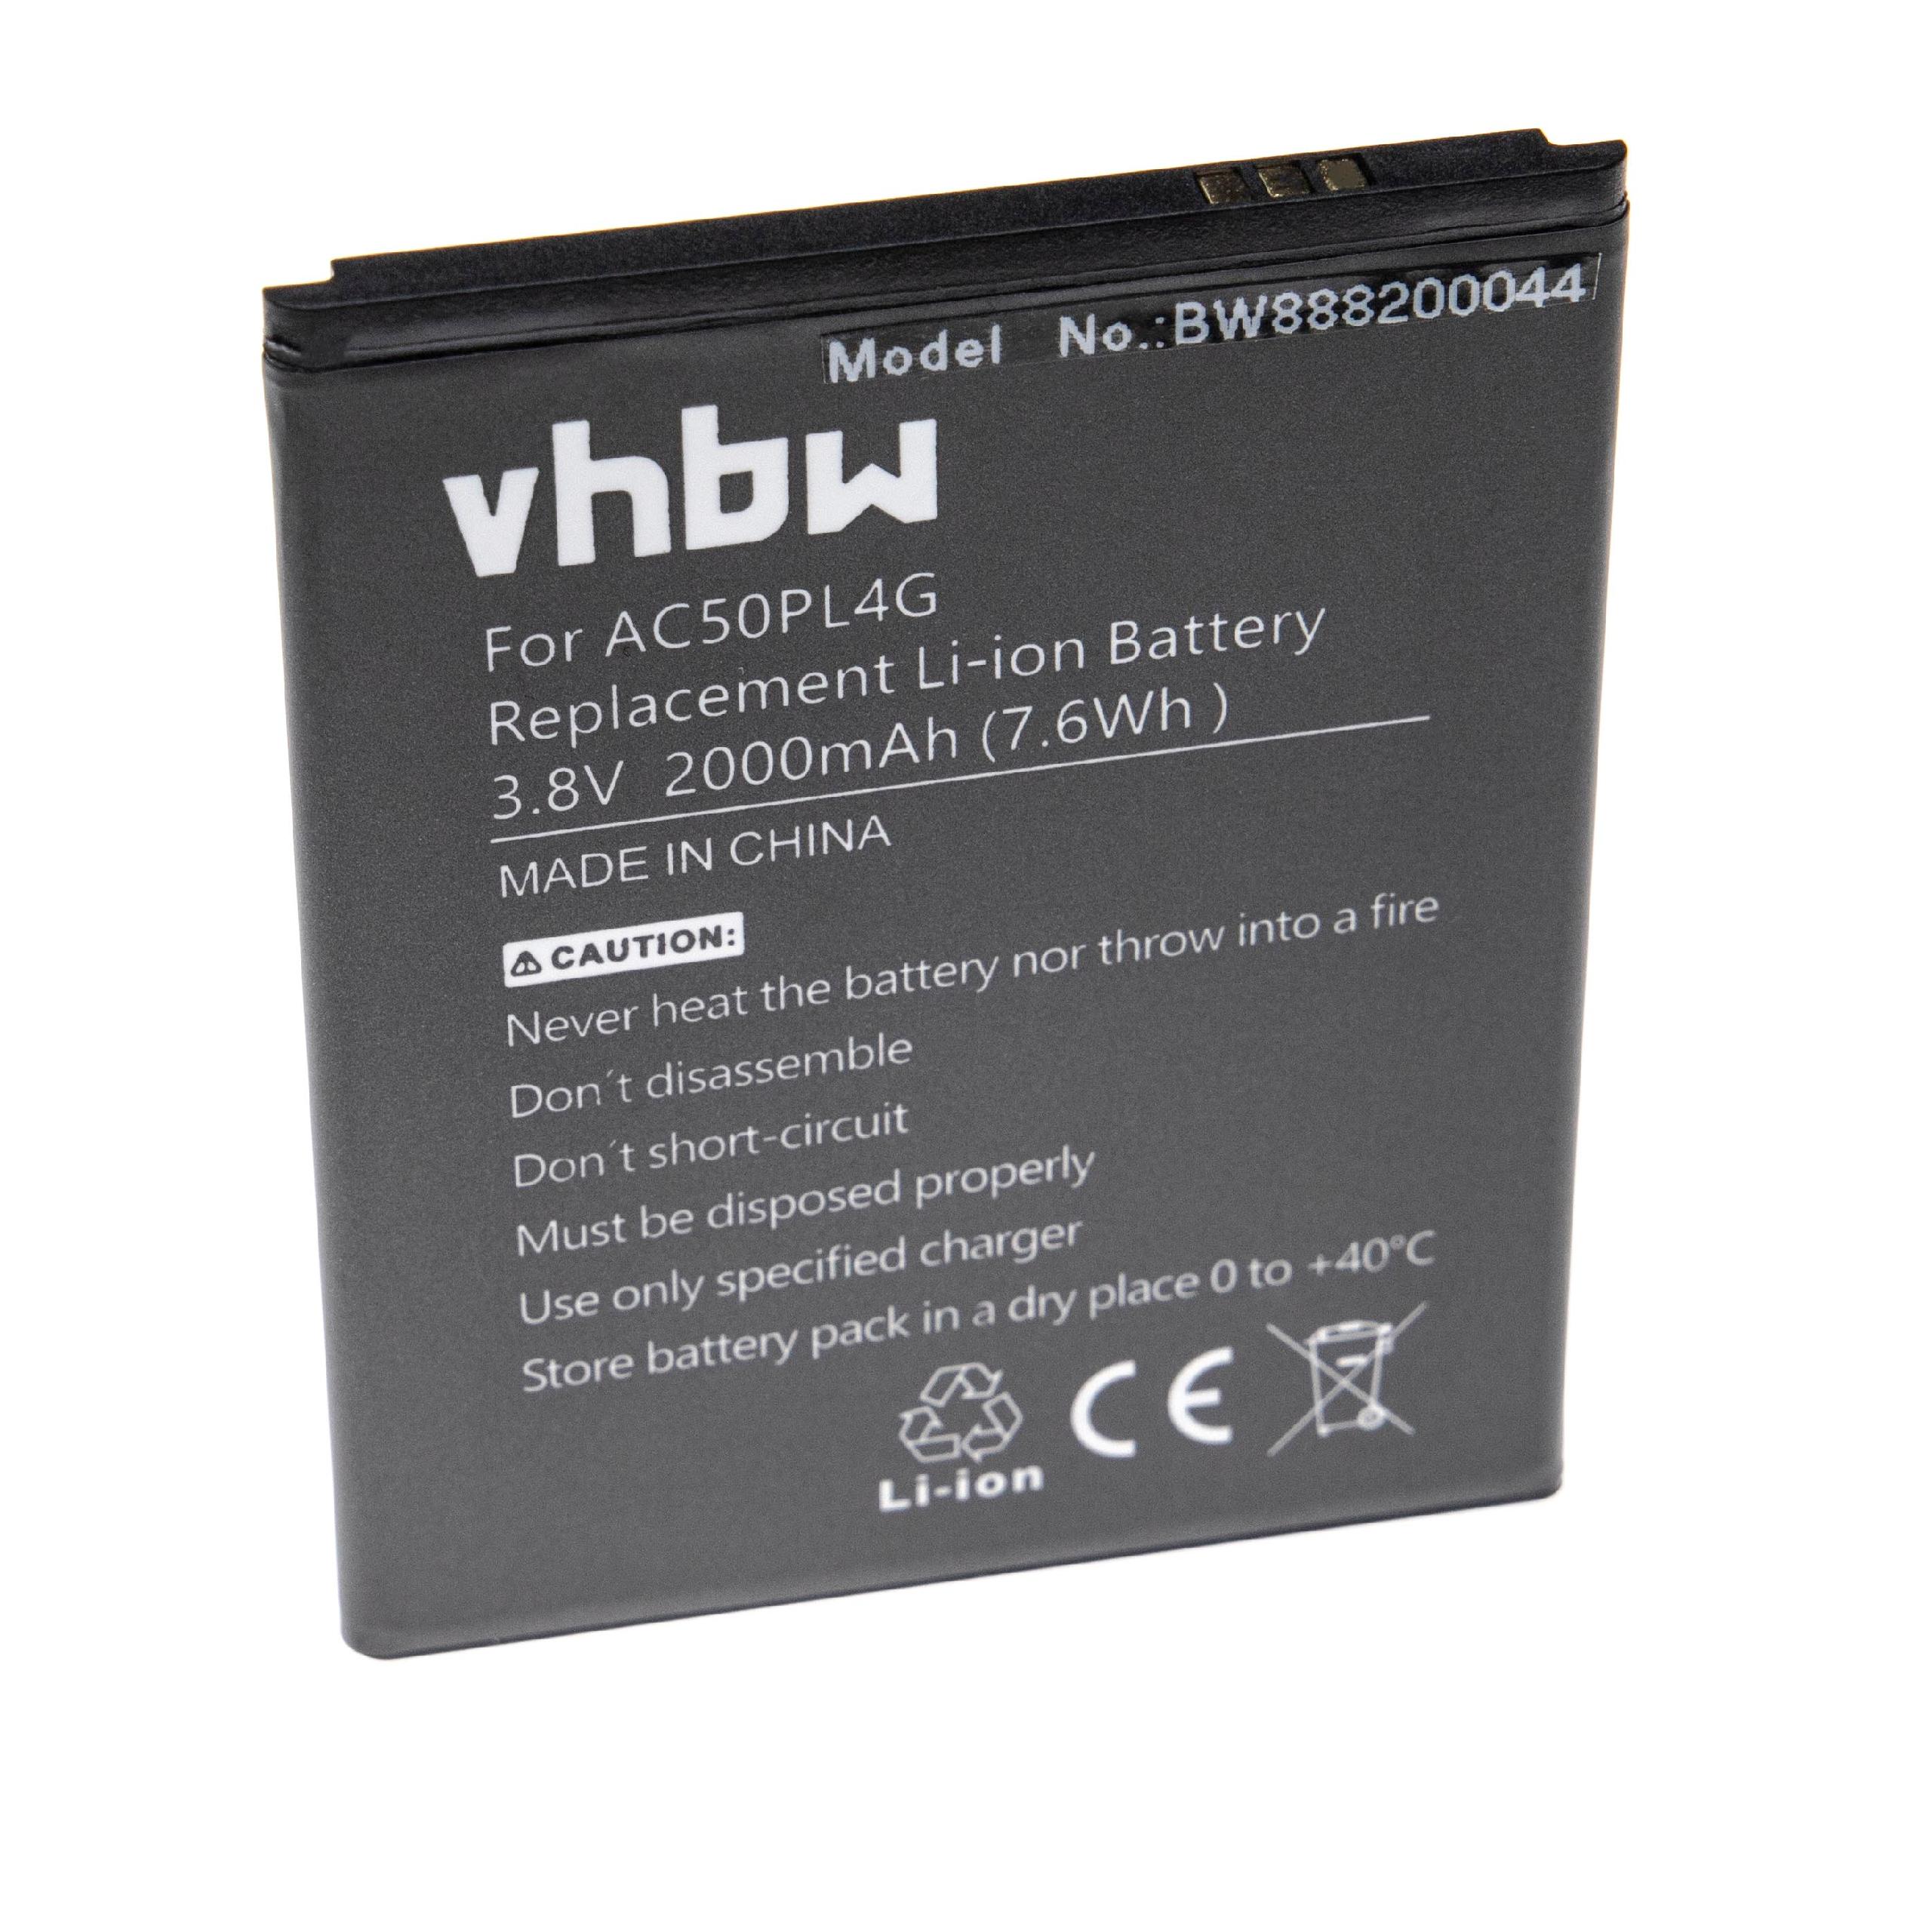 Mobile Phone Battery Replacement for Archos AC50PL4G - 2000mAh 3.8V Li-Ion